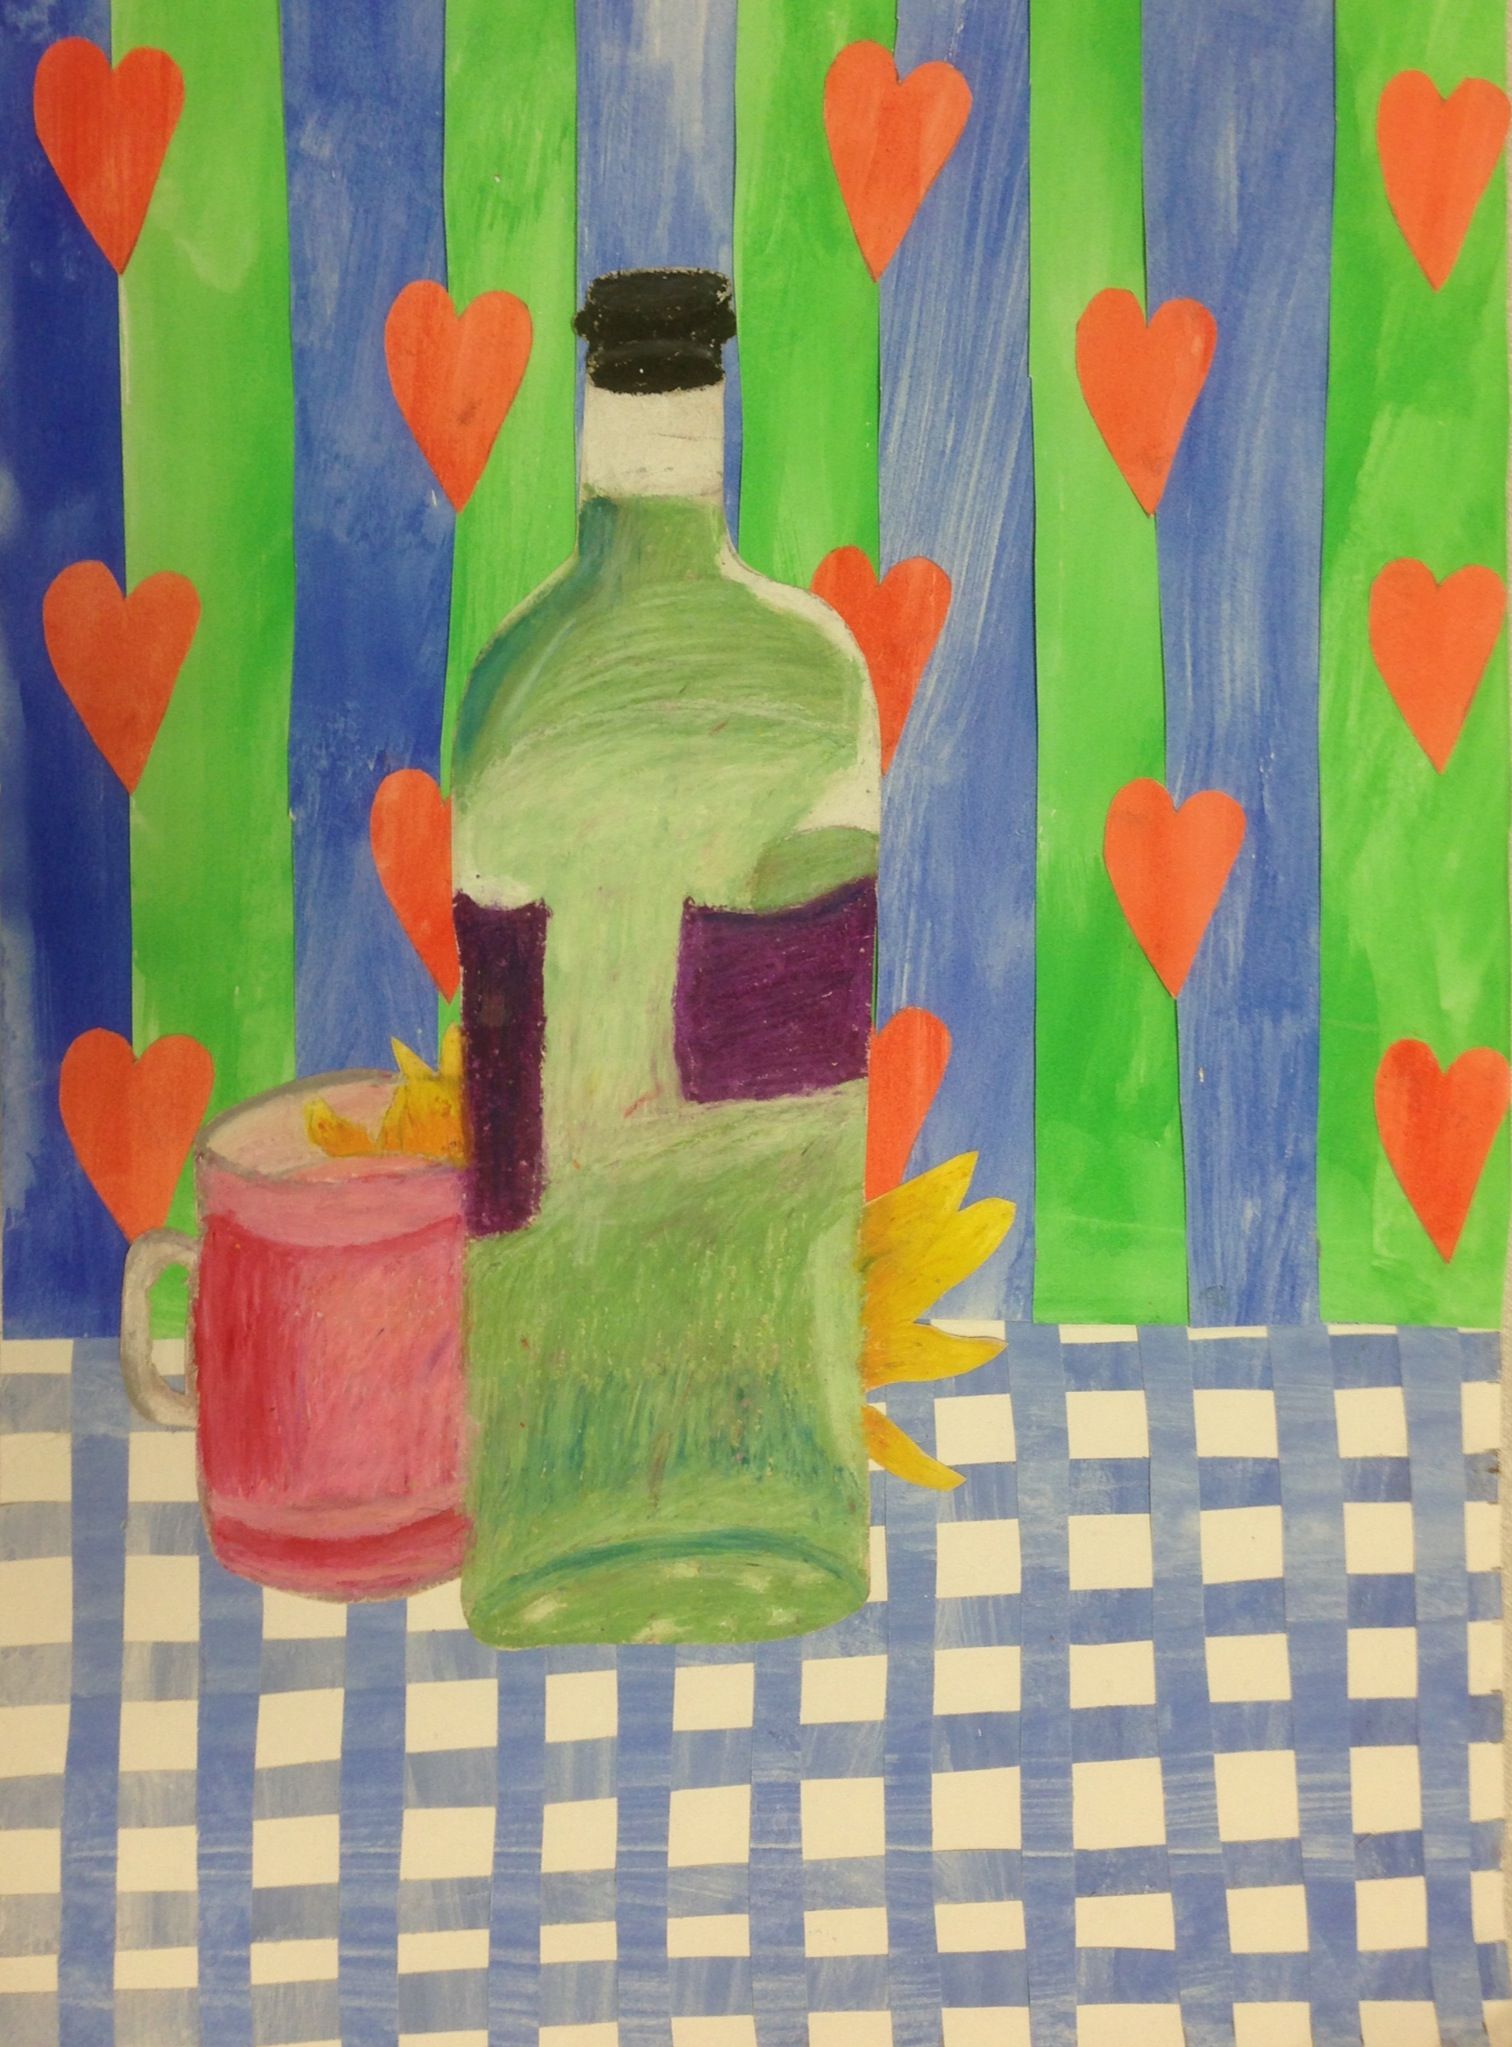 Emily Fauvist Final Piece Including Oil Pastel Still Life From